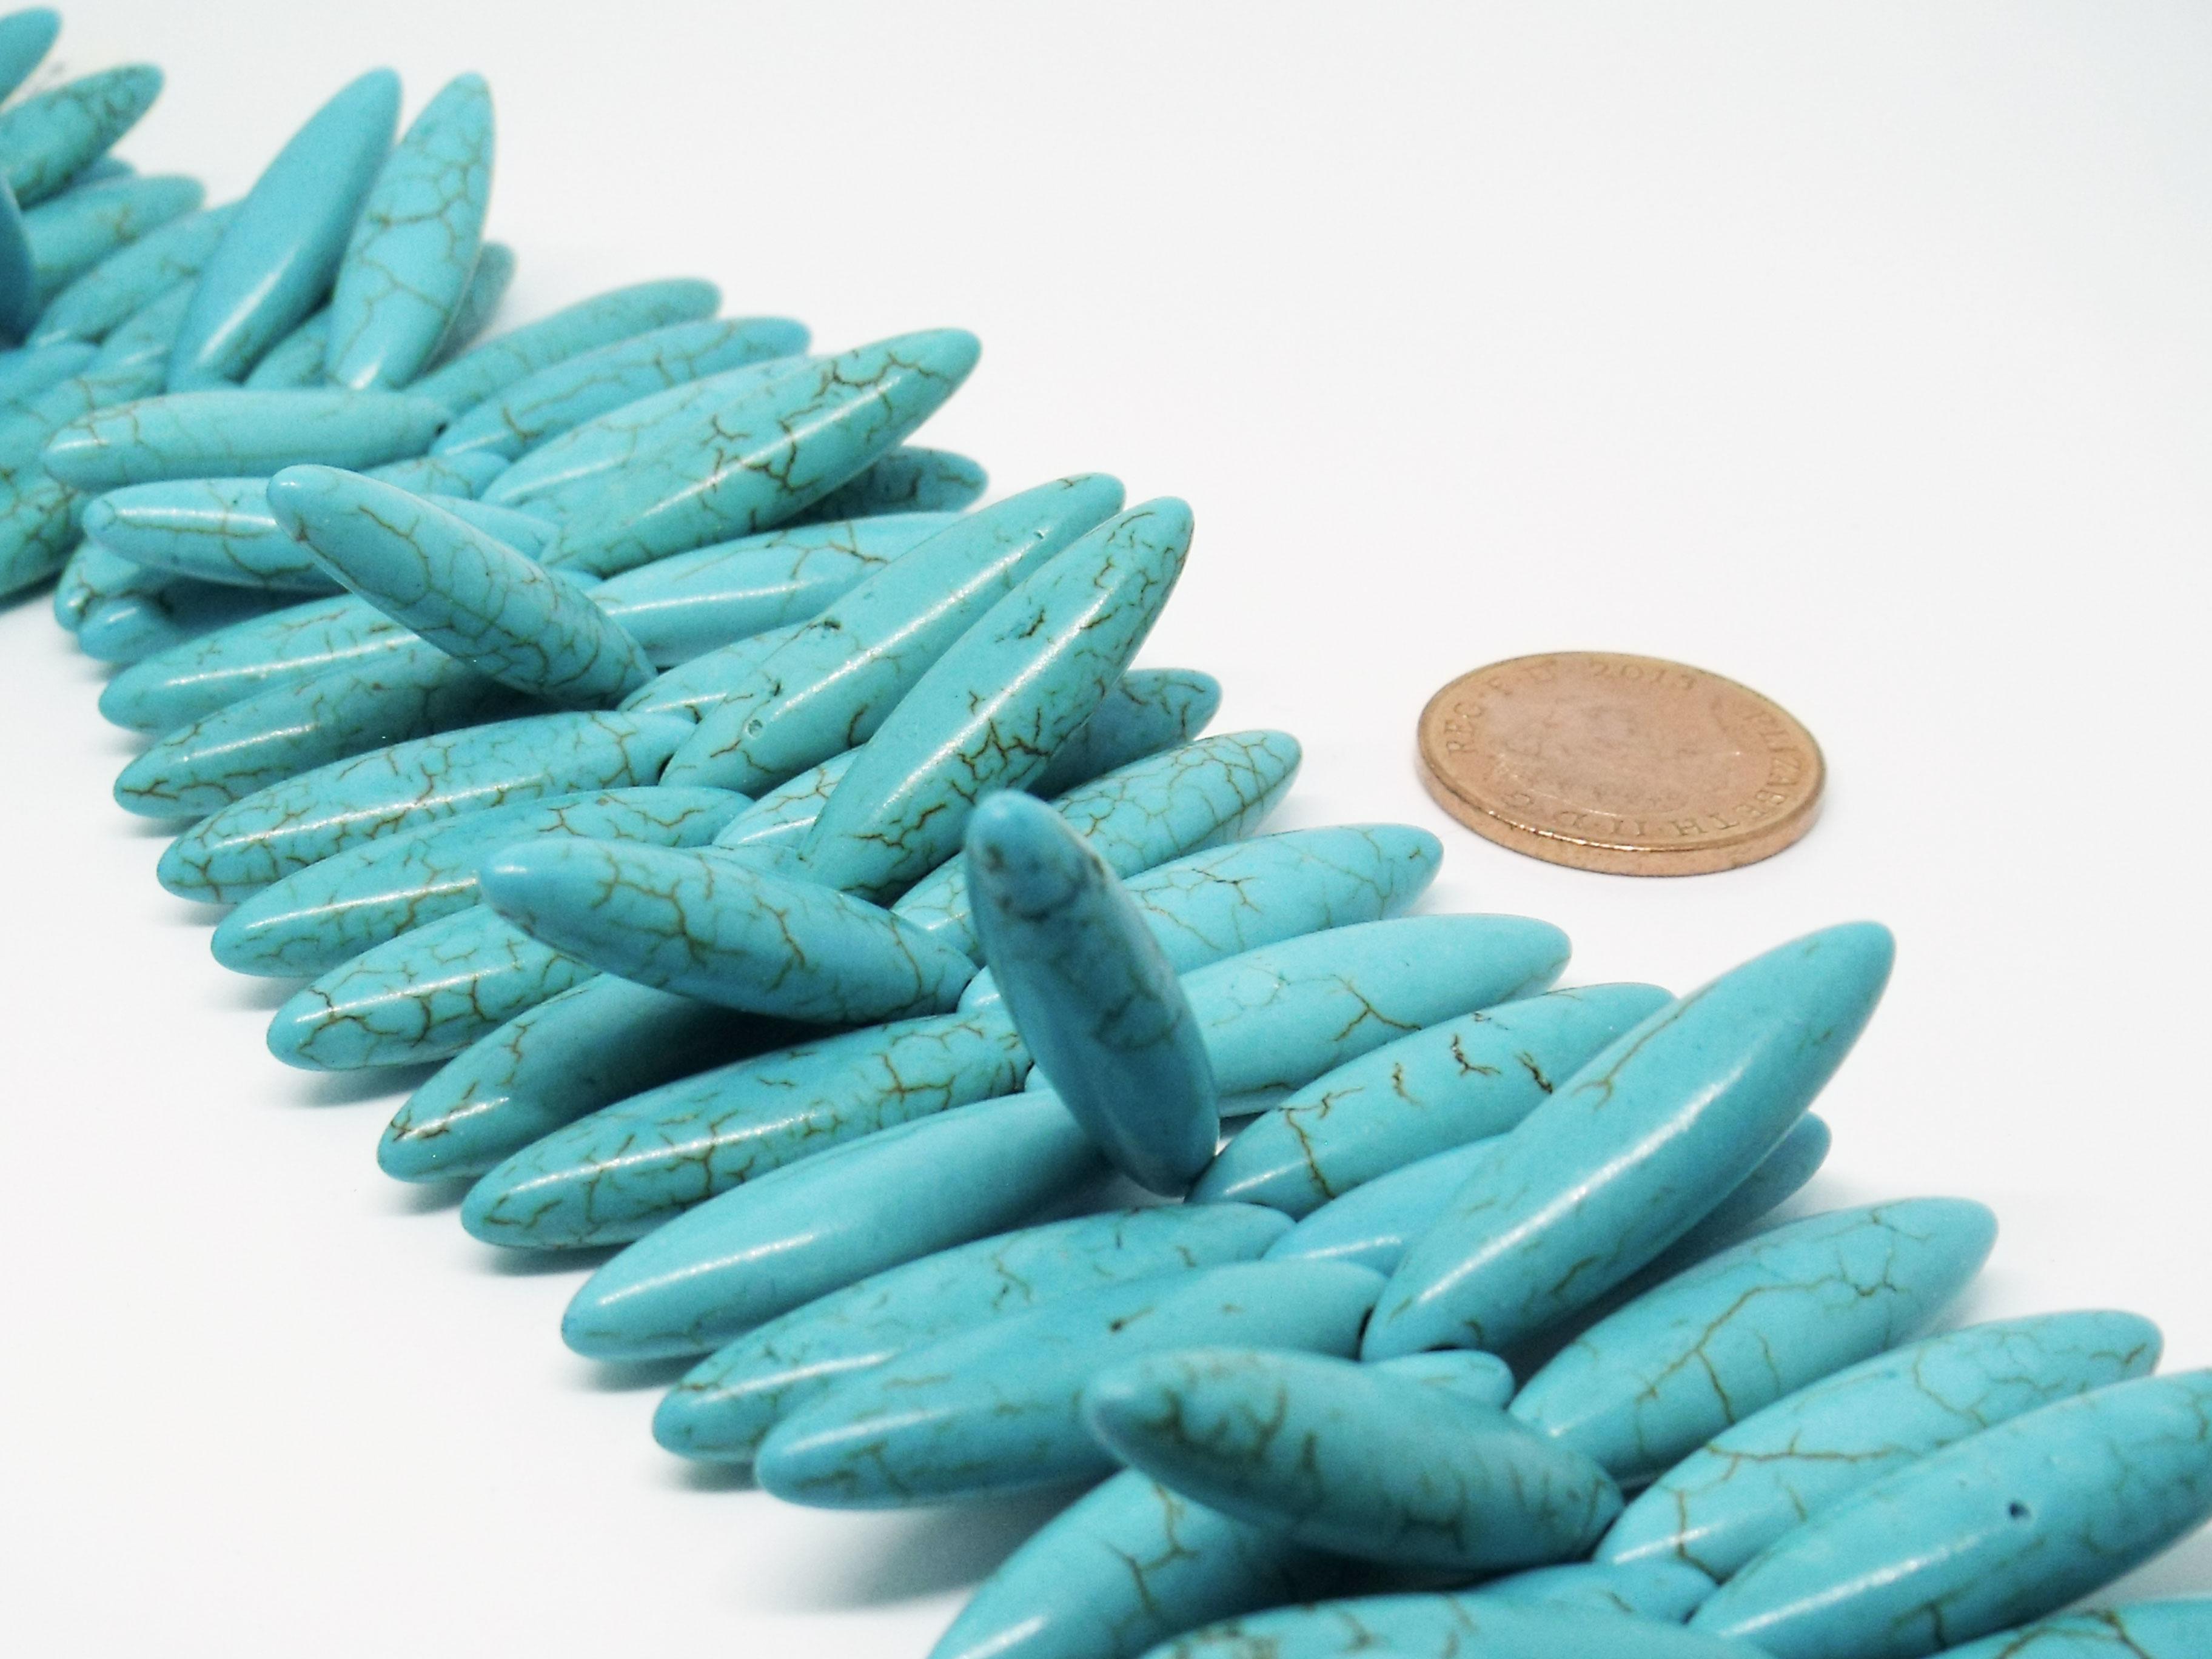 28x7mm Top Drilled Rice Bead - Synthetic Turquoise